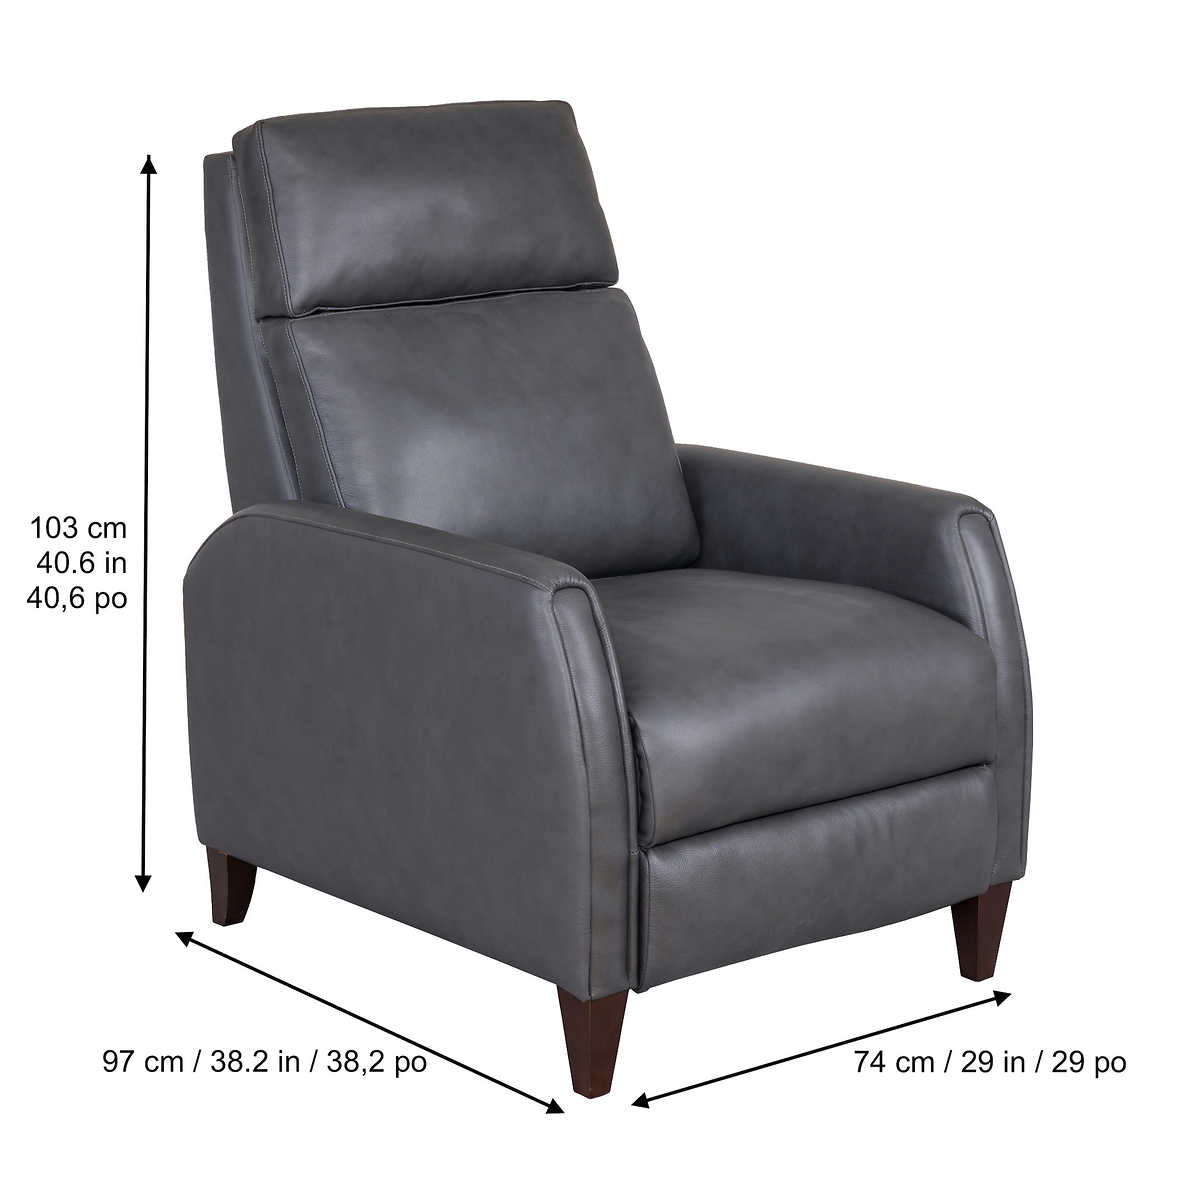 NEW IN BOX - Costco - Decklyn Leather Pushback Recliner - Retail $549